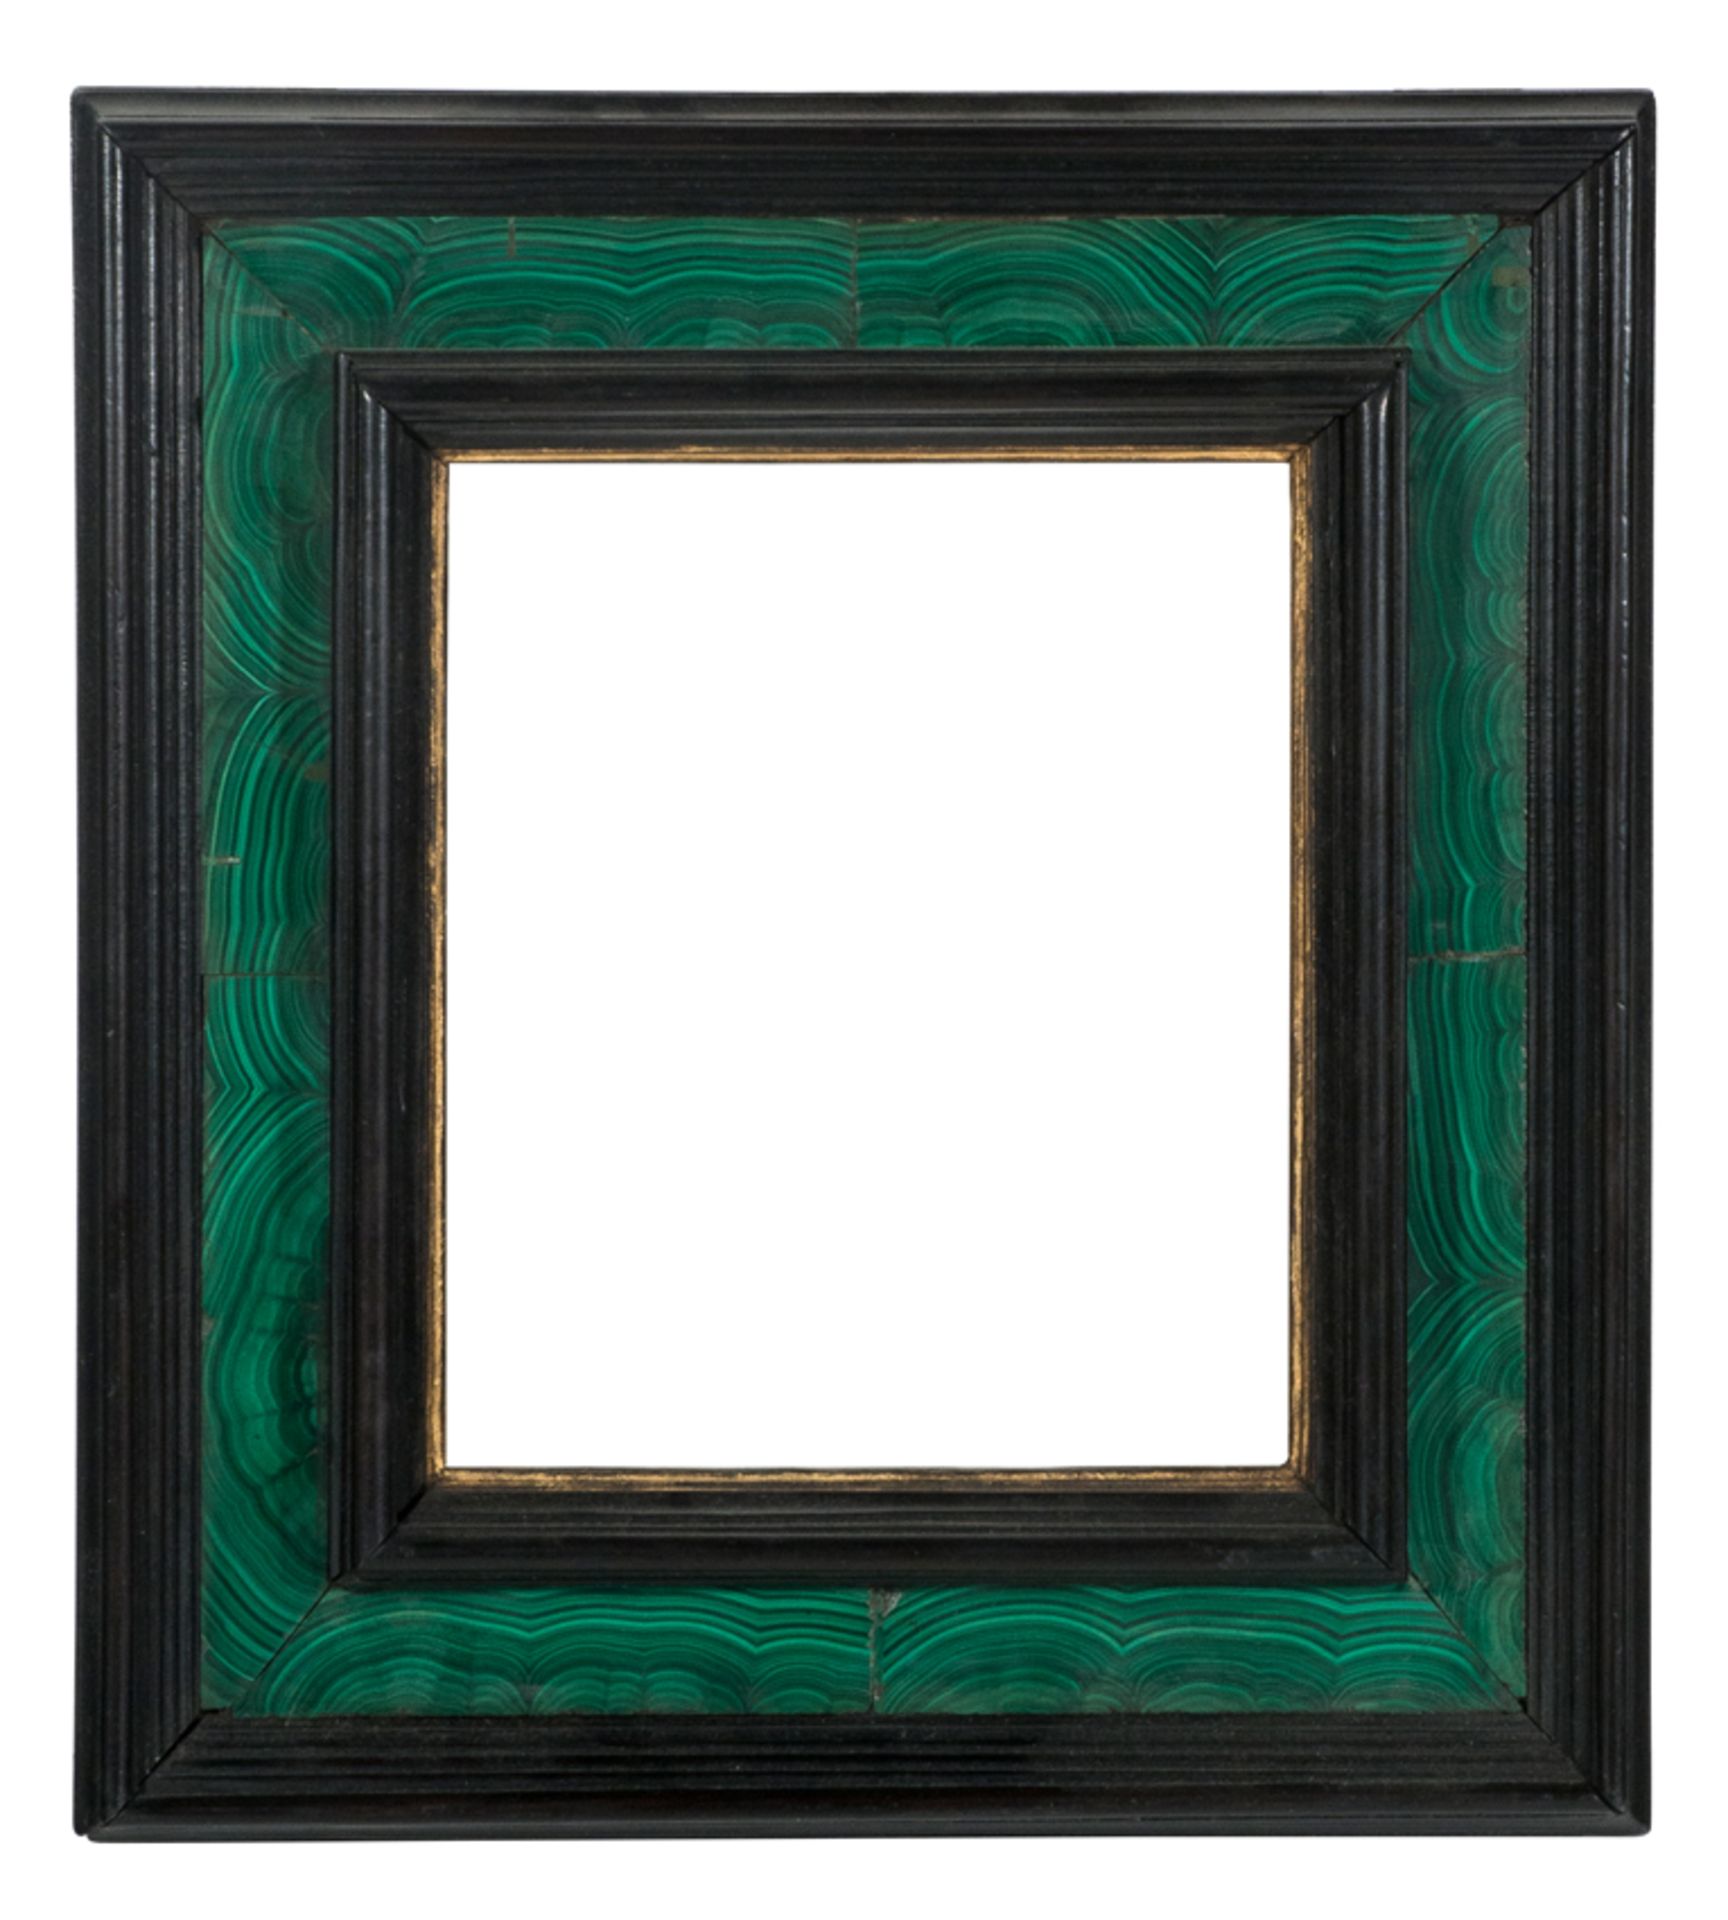 Carved and ebonised frame with malachite plaques.  18th century.